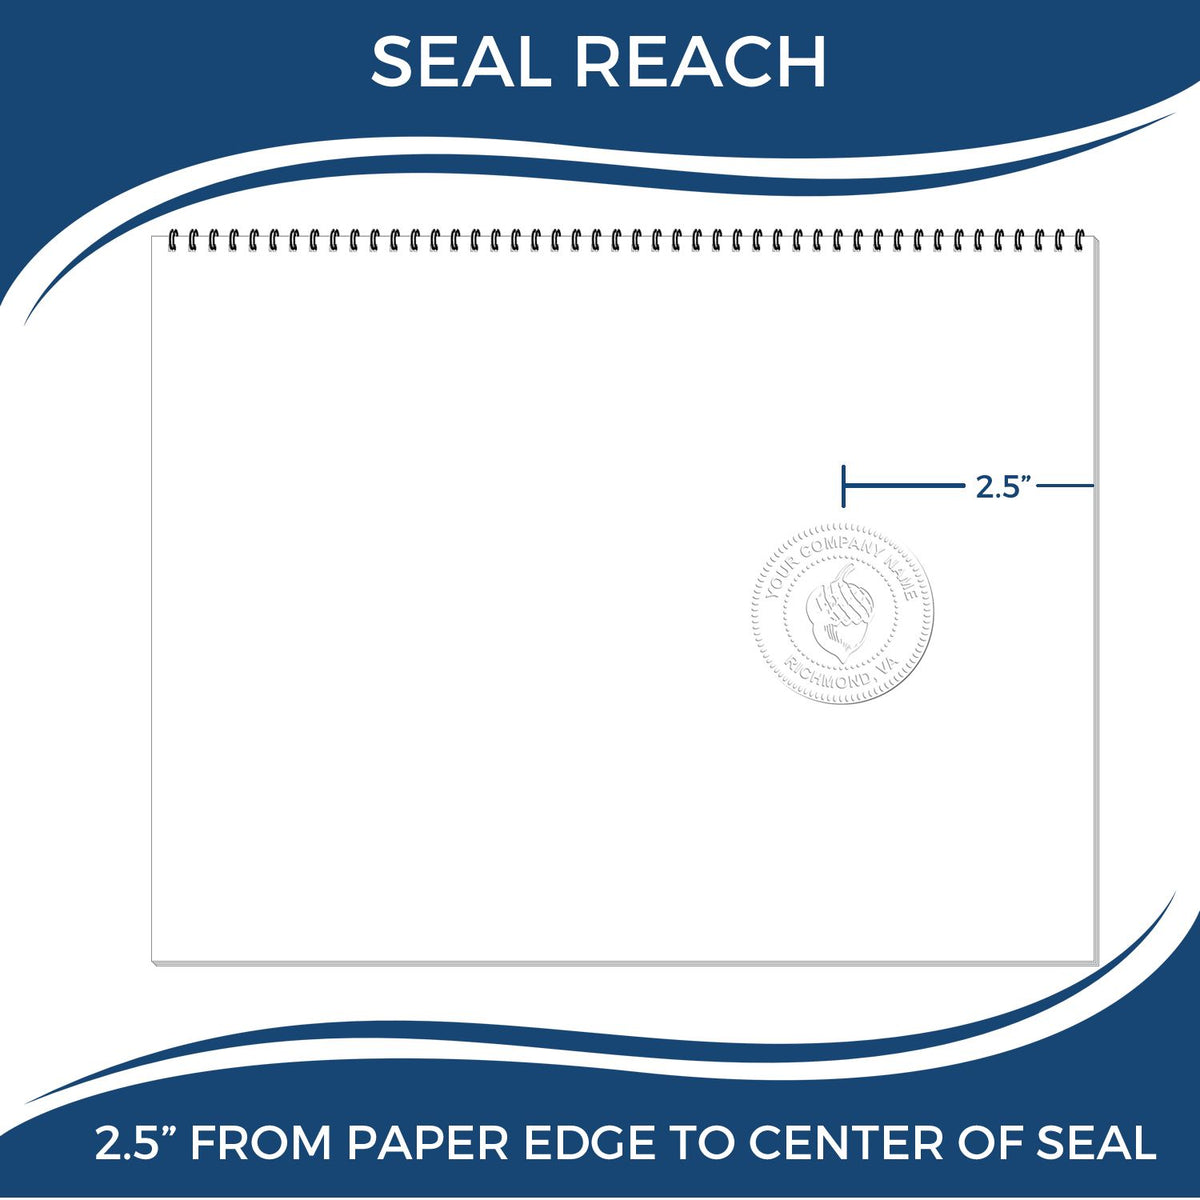 An infographic showing the seal reach which is represented by a ruler and a miniature seal image of the Heavy Duty Cast Iron Alaska Geologist Seal Embosser